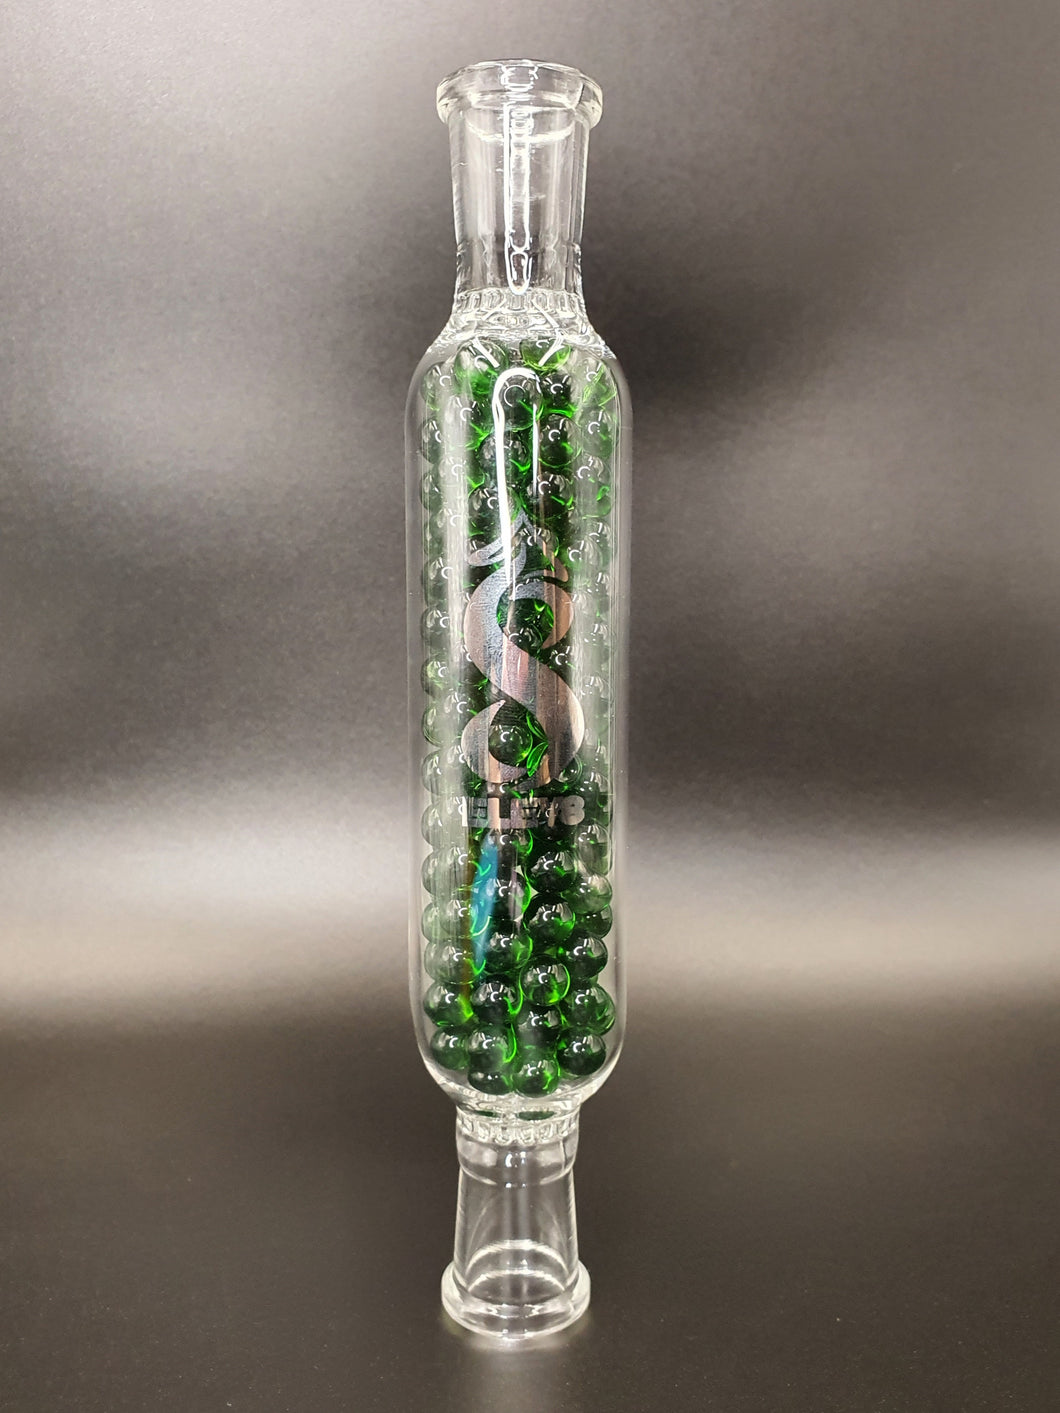 All-Glass Vapor Tamer Cooling Device with Green Beads - Elev8